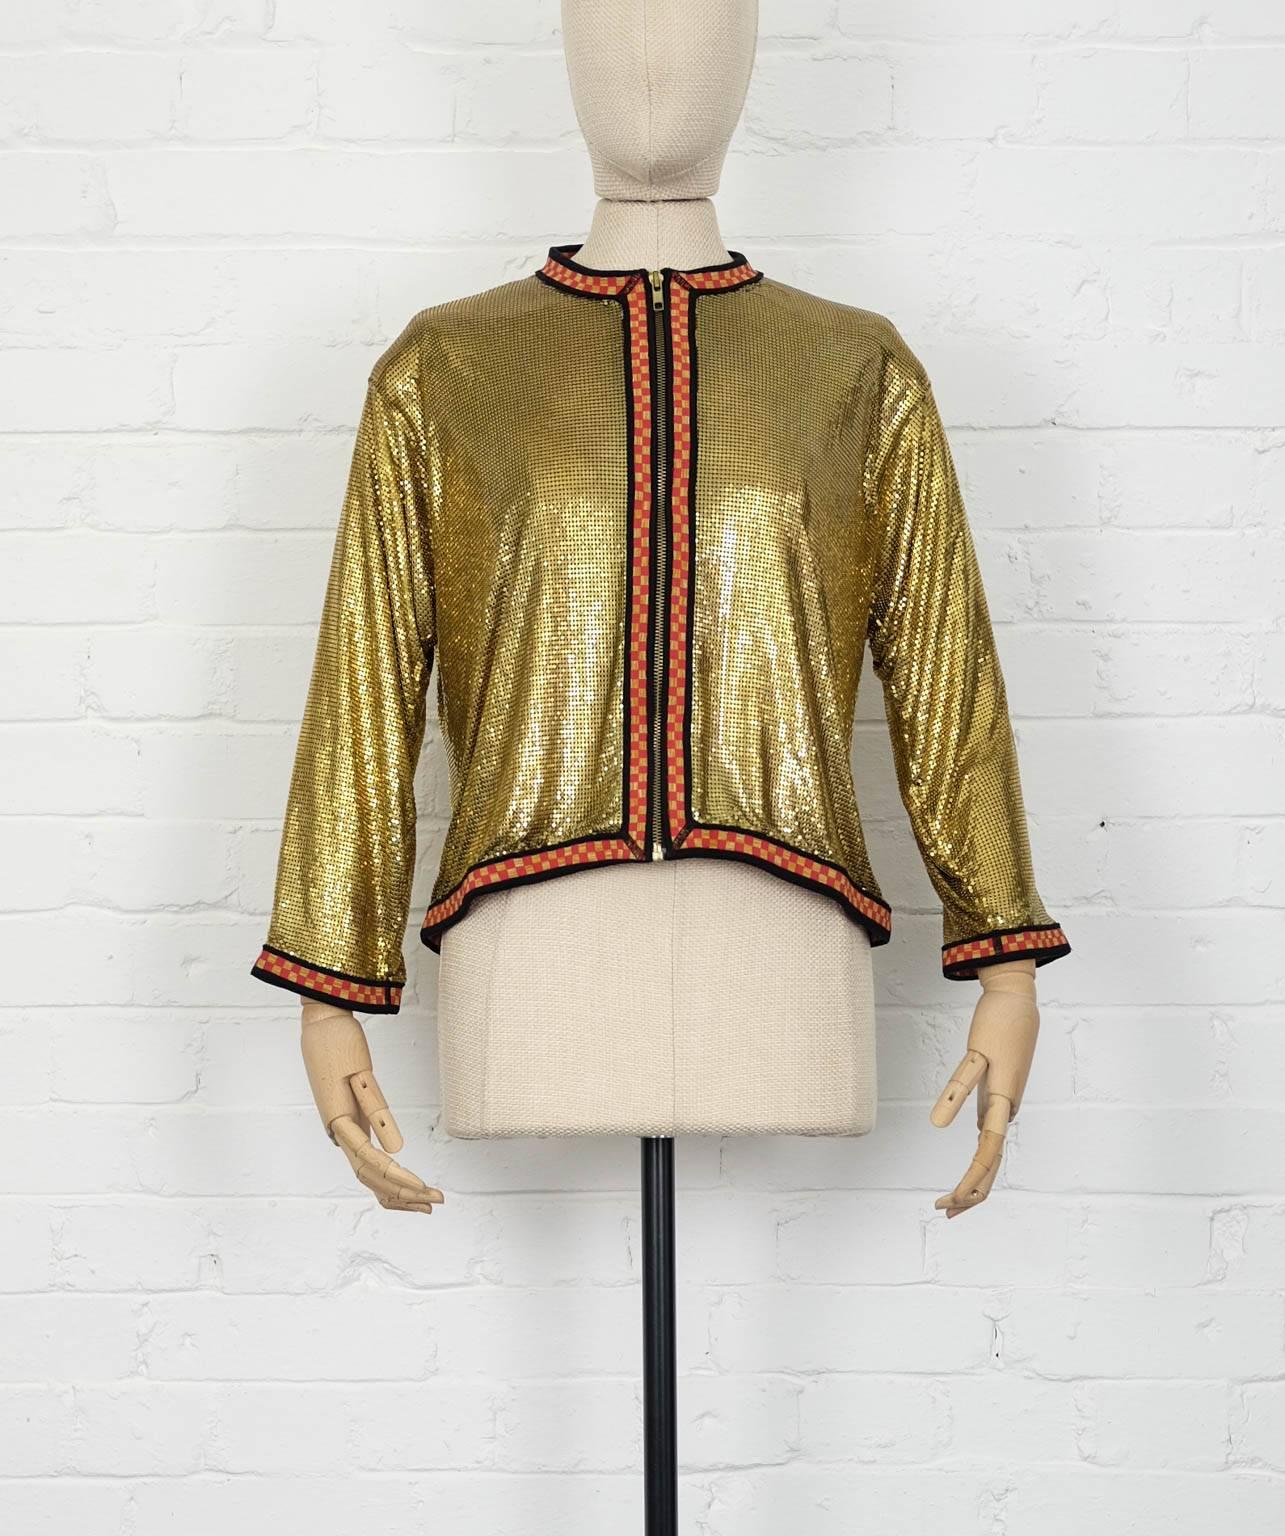 Gold-tone metal and cotton blend chainmail effect jacket from Jean Paul Gaultier Vintage featuring a collarless design, a red and yellow checkboard effect trim, a front zip fastening, three-quarter length sleeves and a cropped length.
This item is